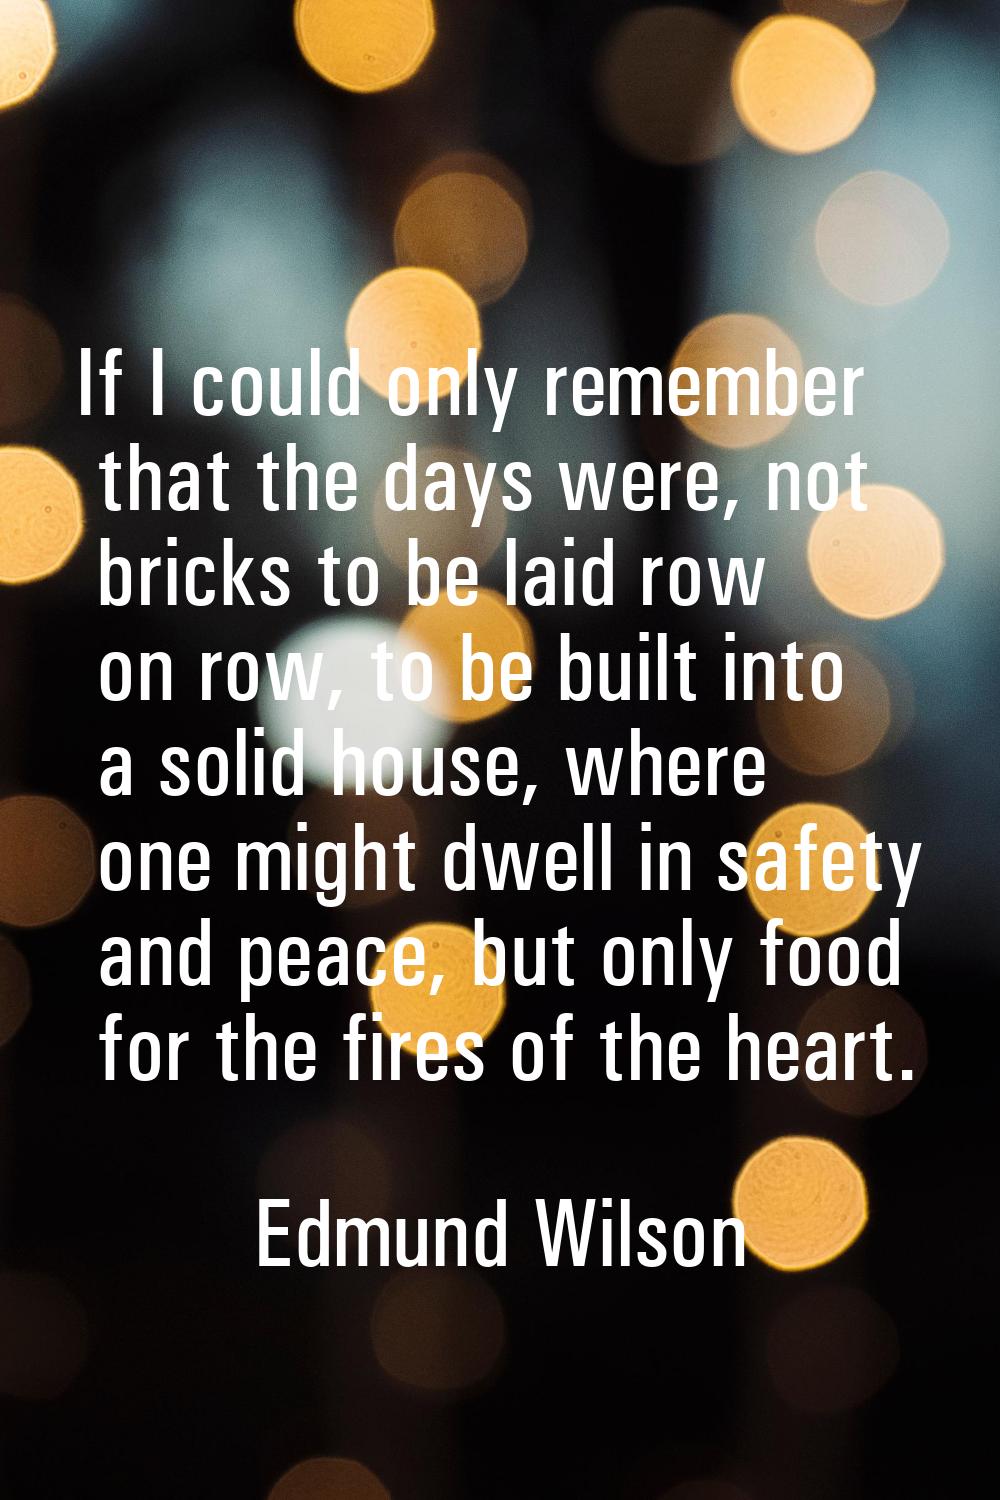 If I could only remember that the days were, not bricks to be laid row on row, to be built into a s